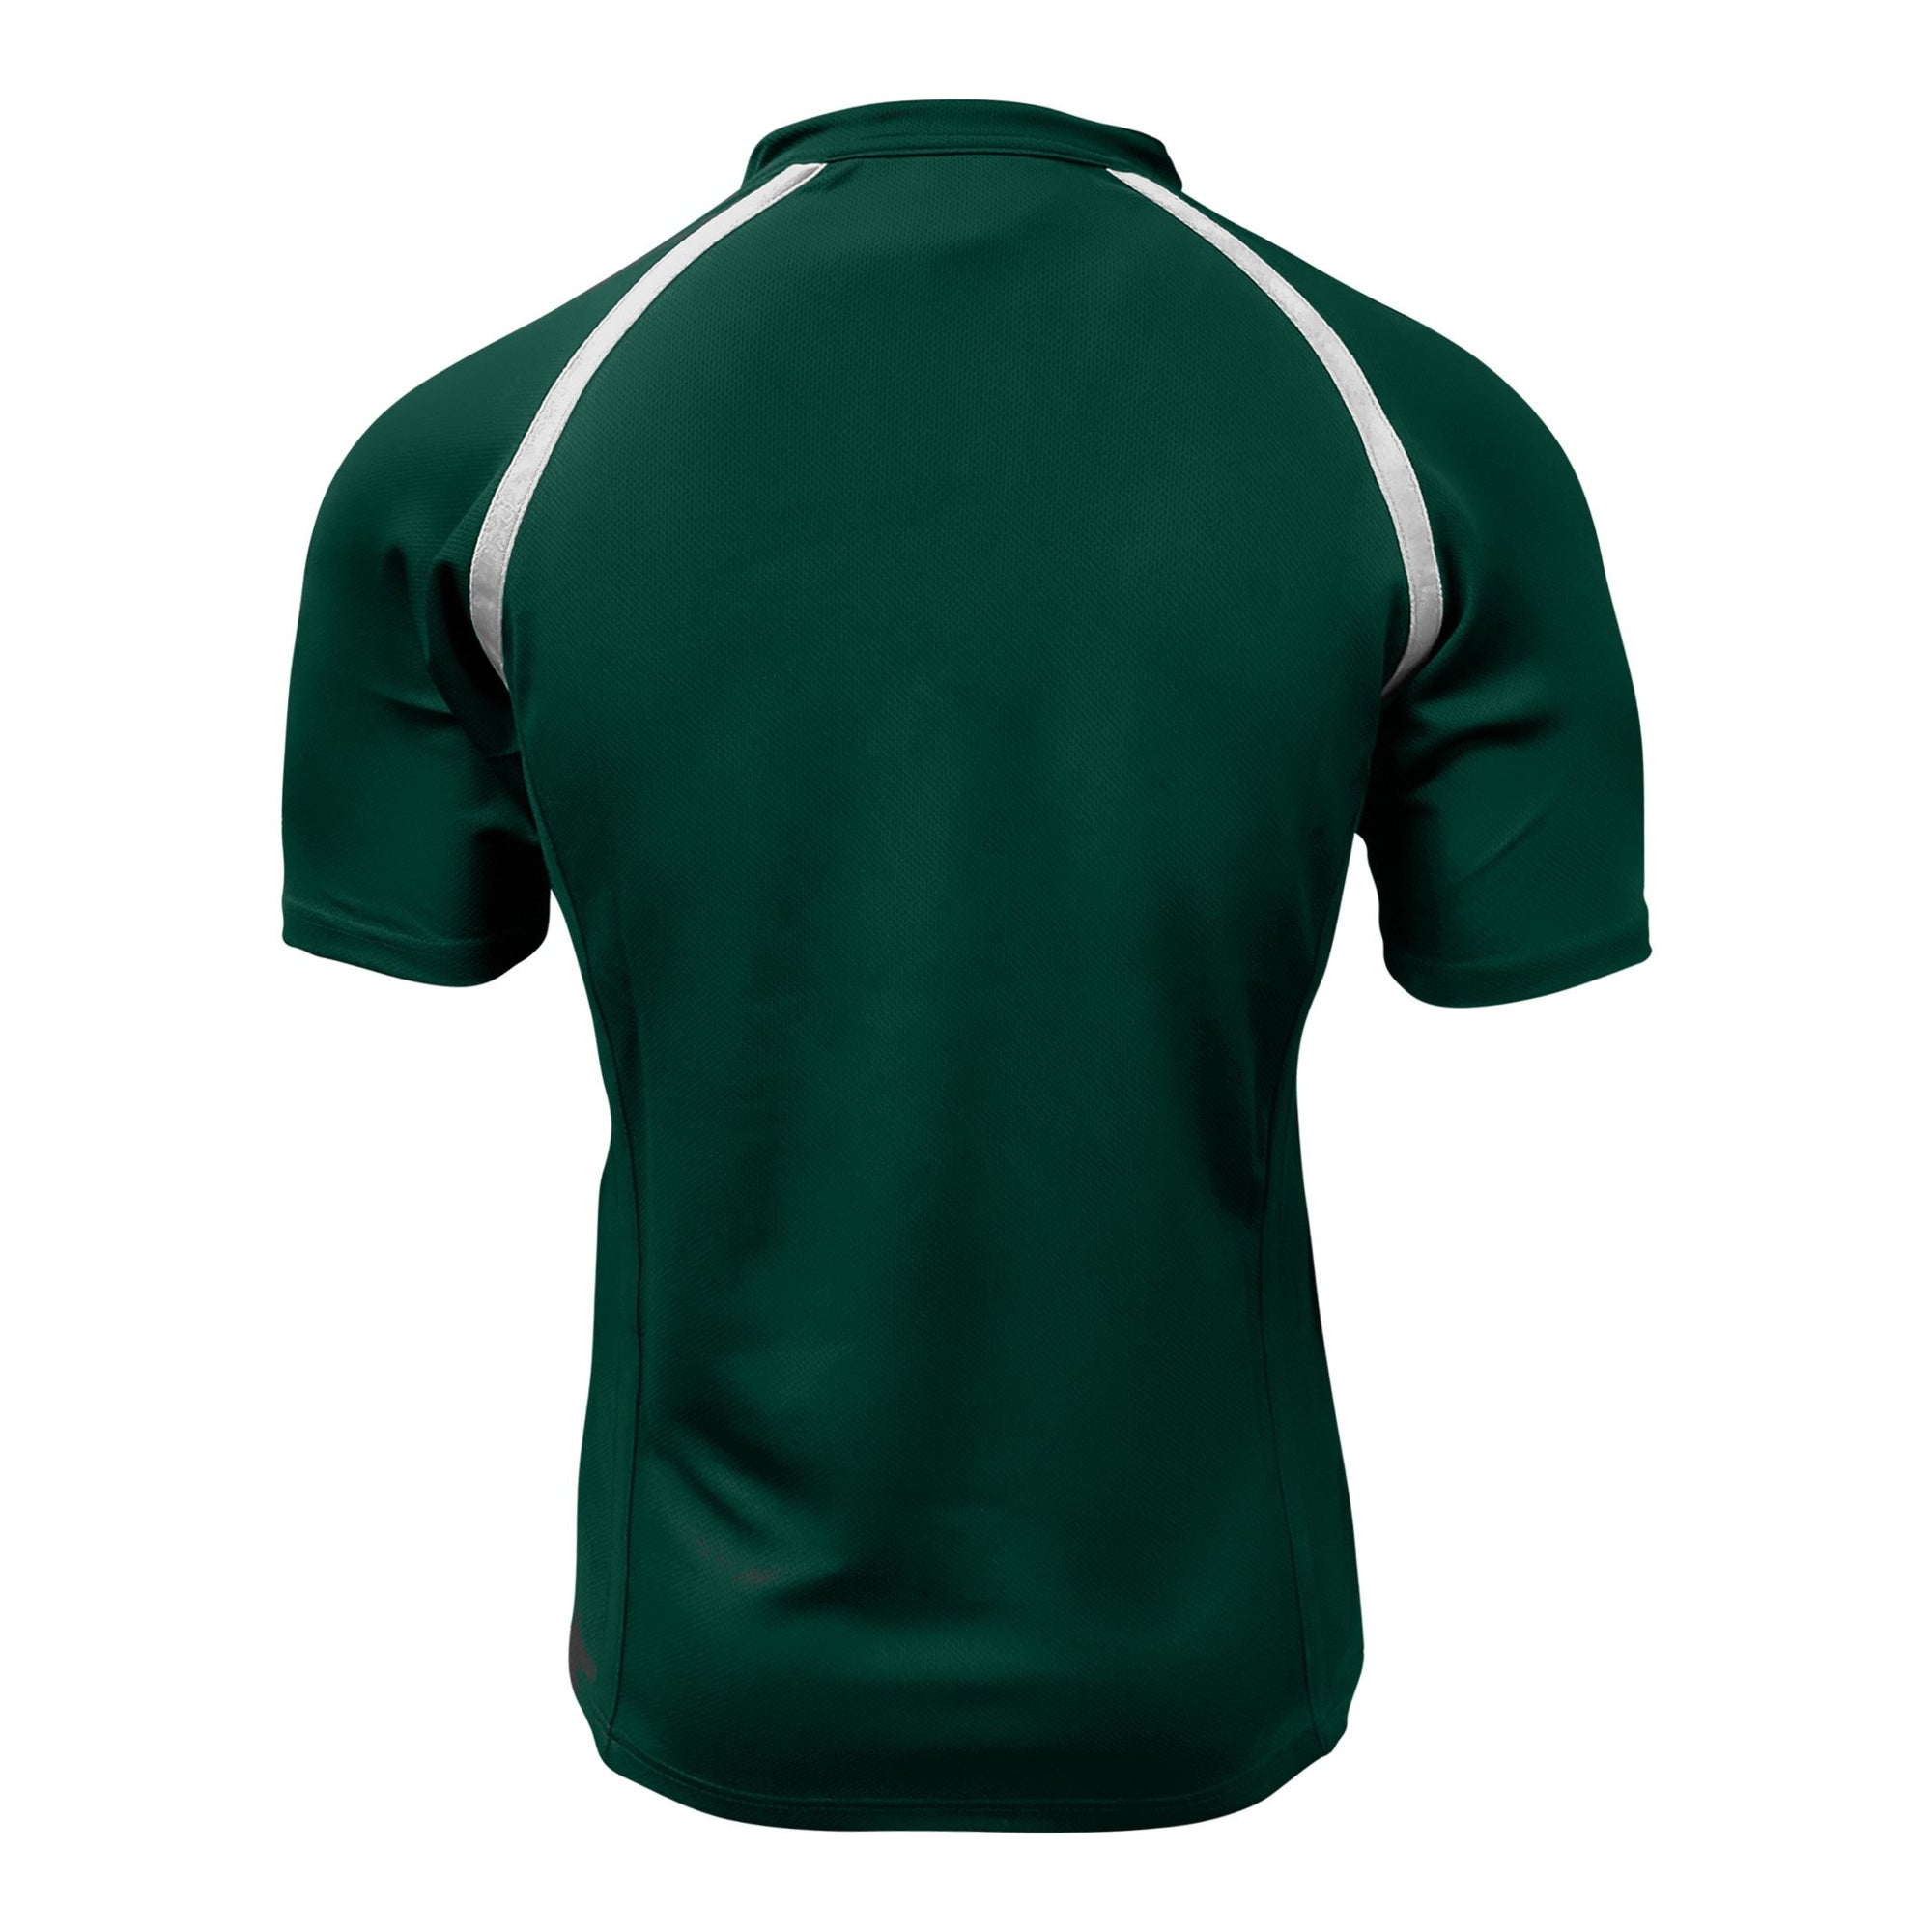 Rugby Imports Quad City Irish Rugby XACT II Jersey